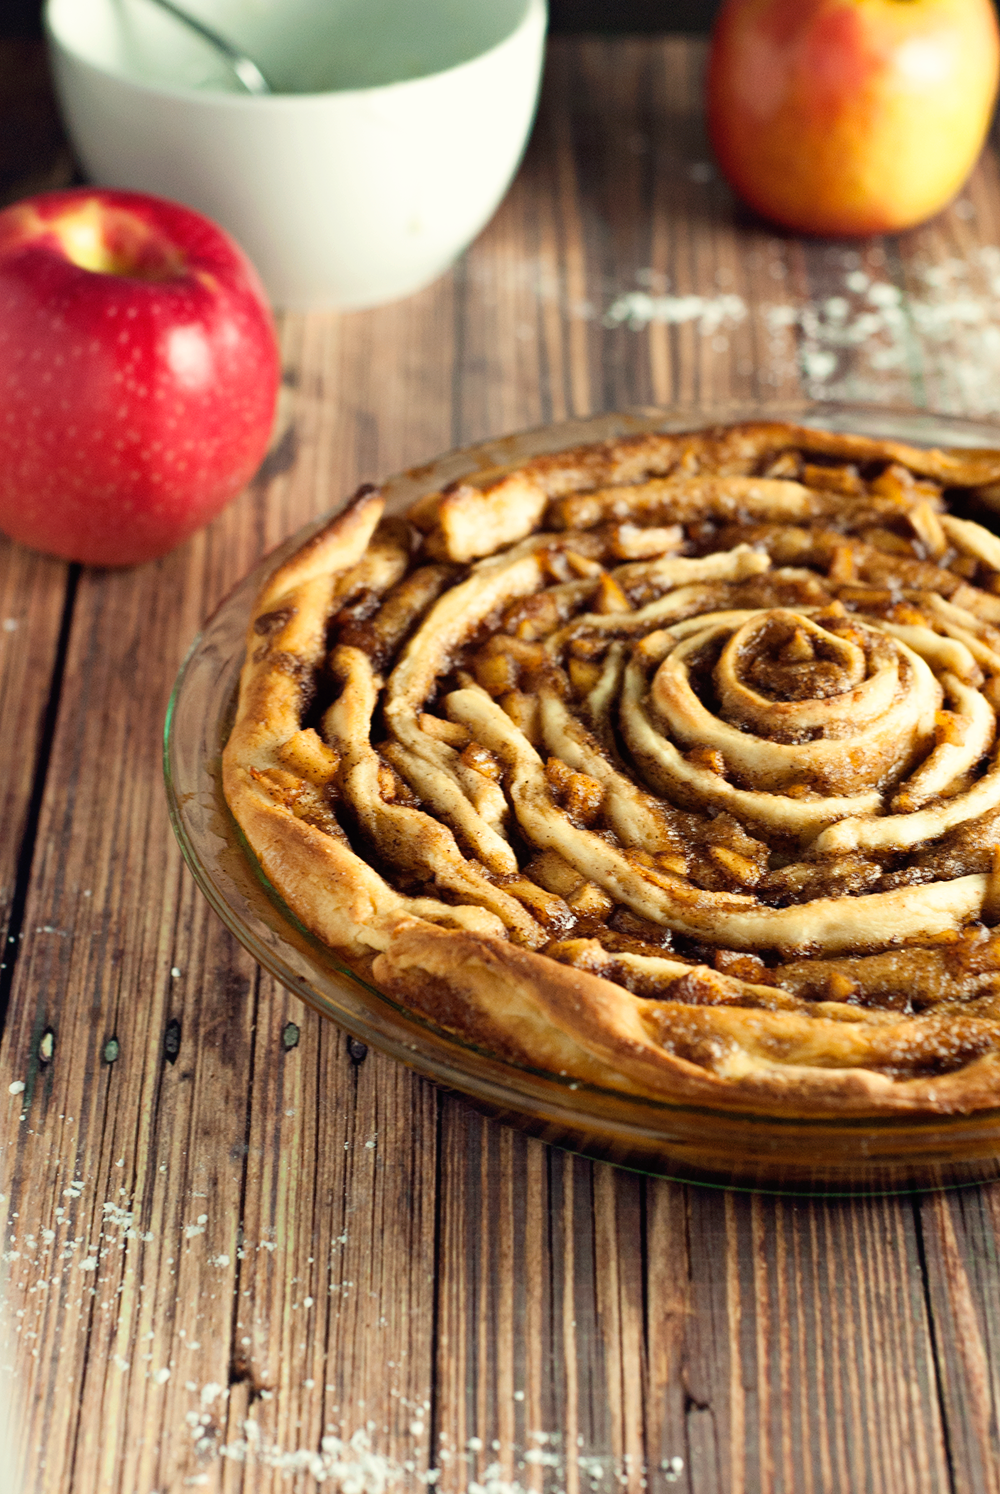 Decadently delicious, this spiced apple cinnamon roll cake with blow you away with flavor!